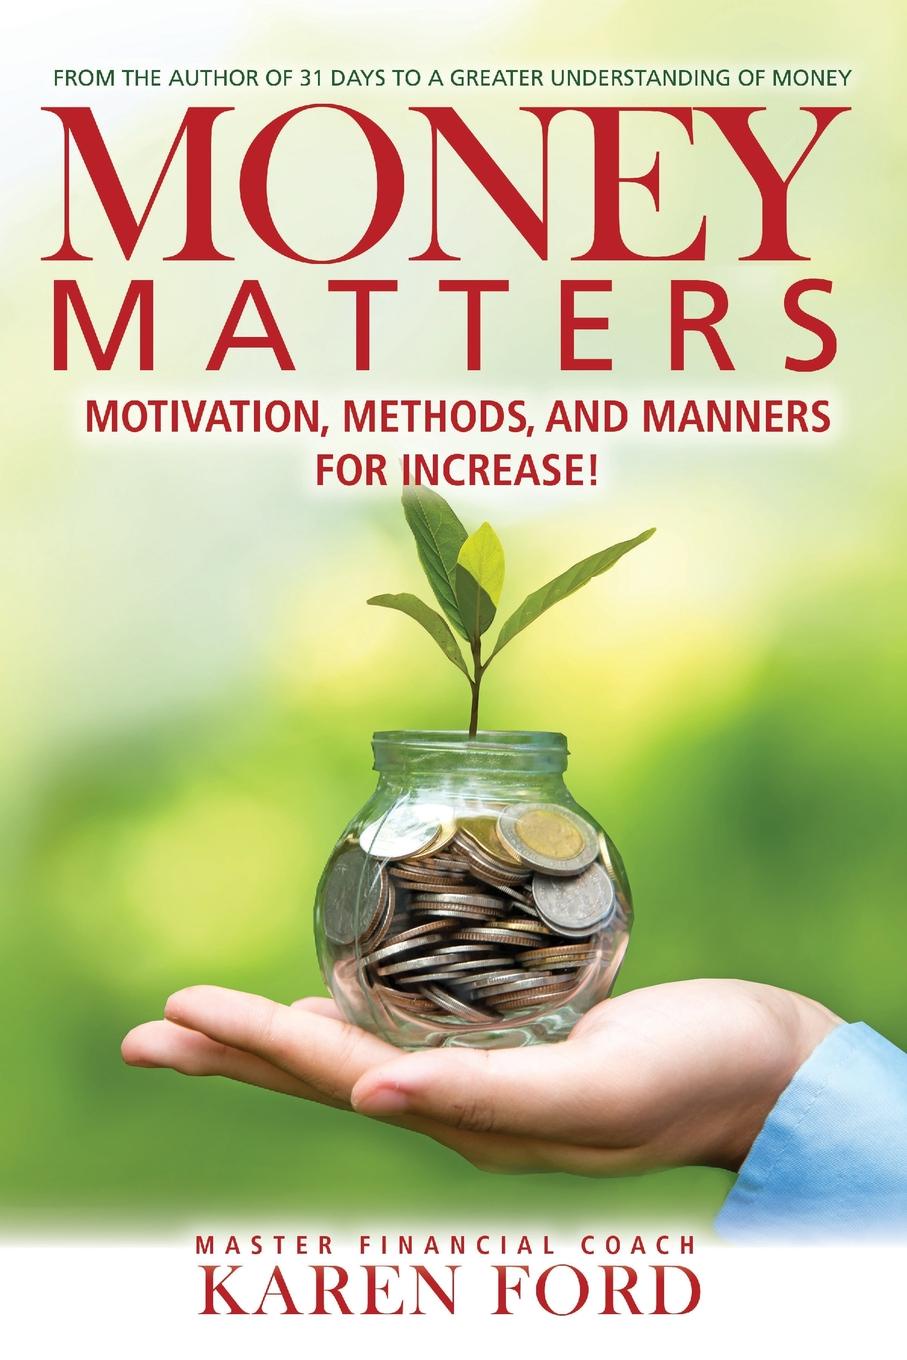 Money Matters. Motivation, Methods, and Manners for Increase.